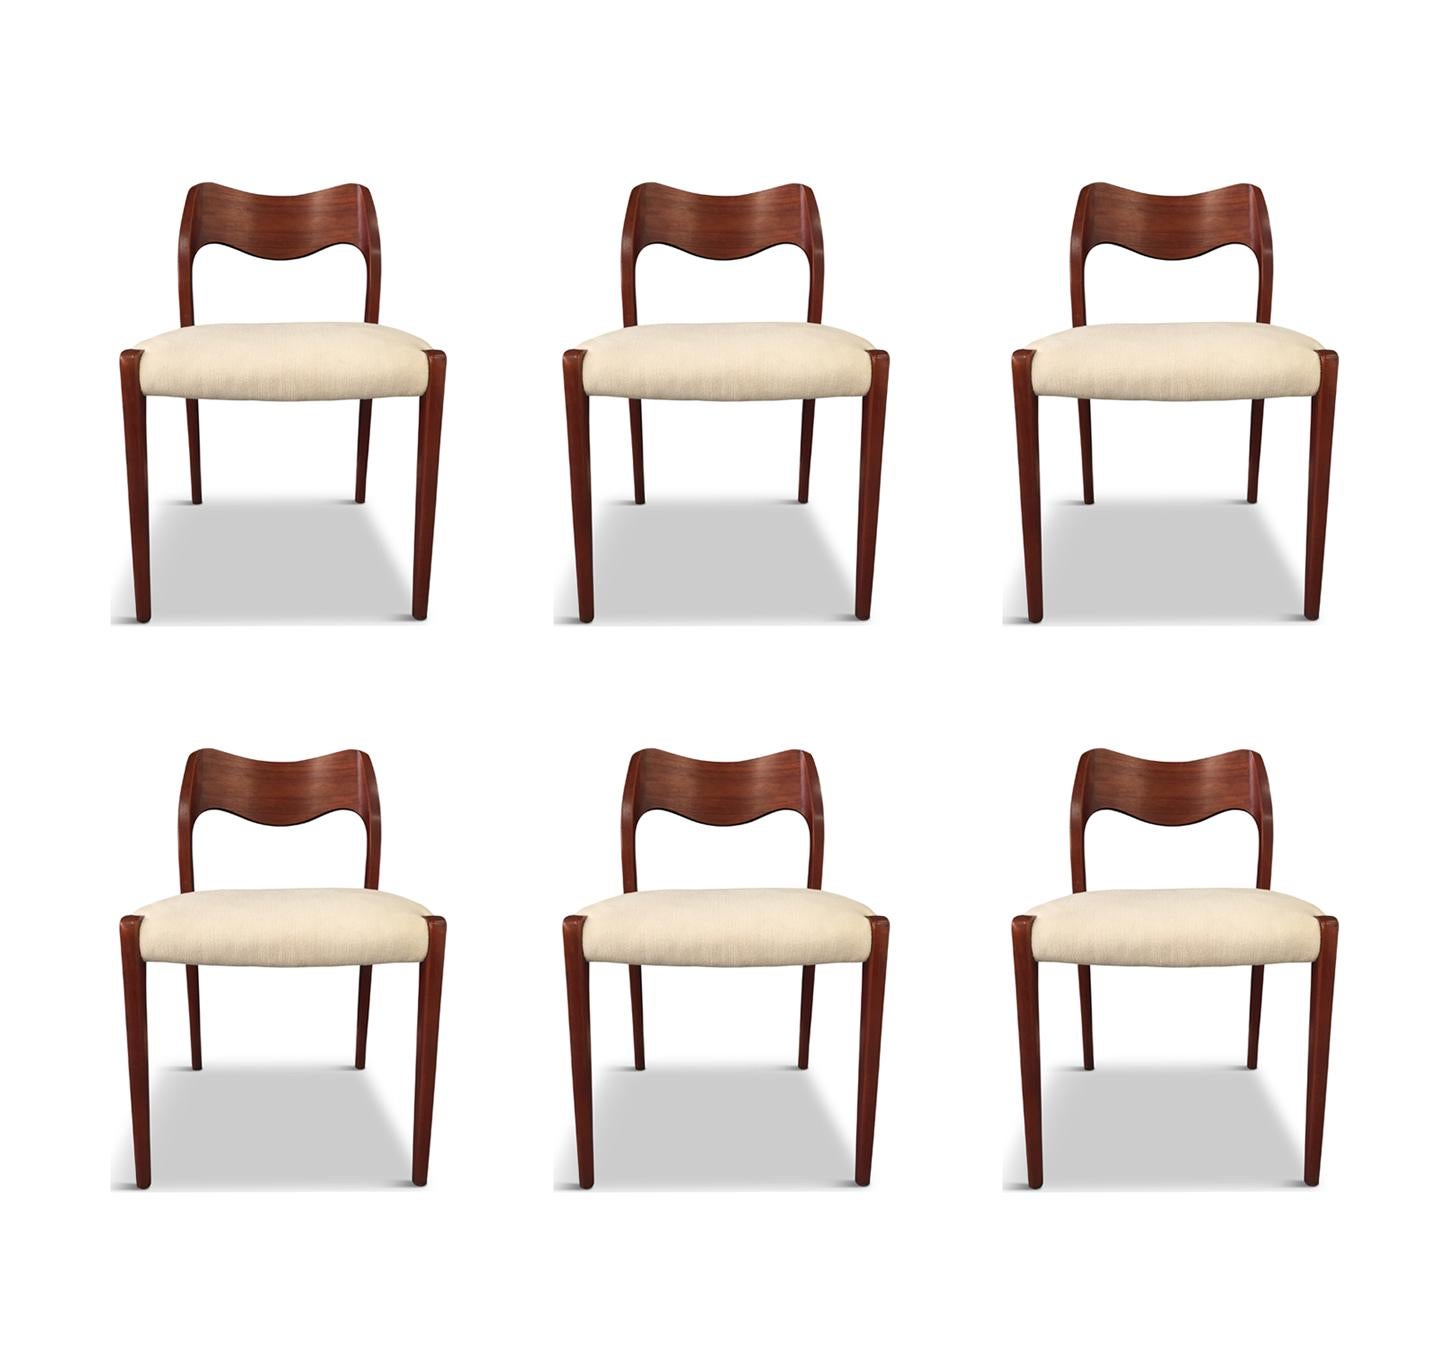 1951 Danish solid teak dining chairs, model 71, by Niels Otto Møller for J. L. Møllers Møbelfabrik upholstered in a textured white velvet. Beautiful teak with natural oil finish. These chairs are in lovely condition with light wear.